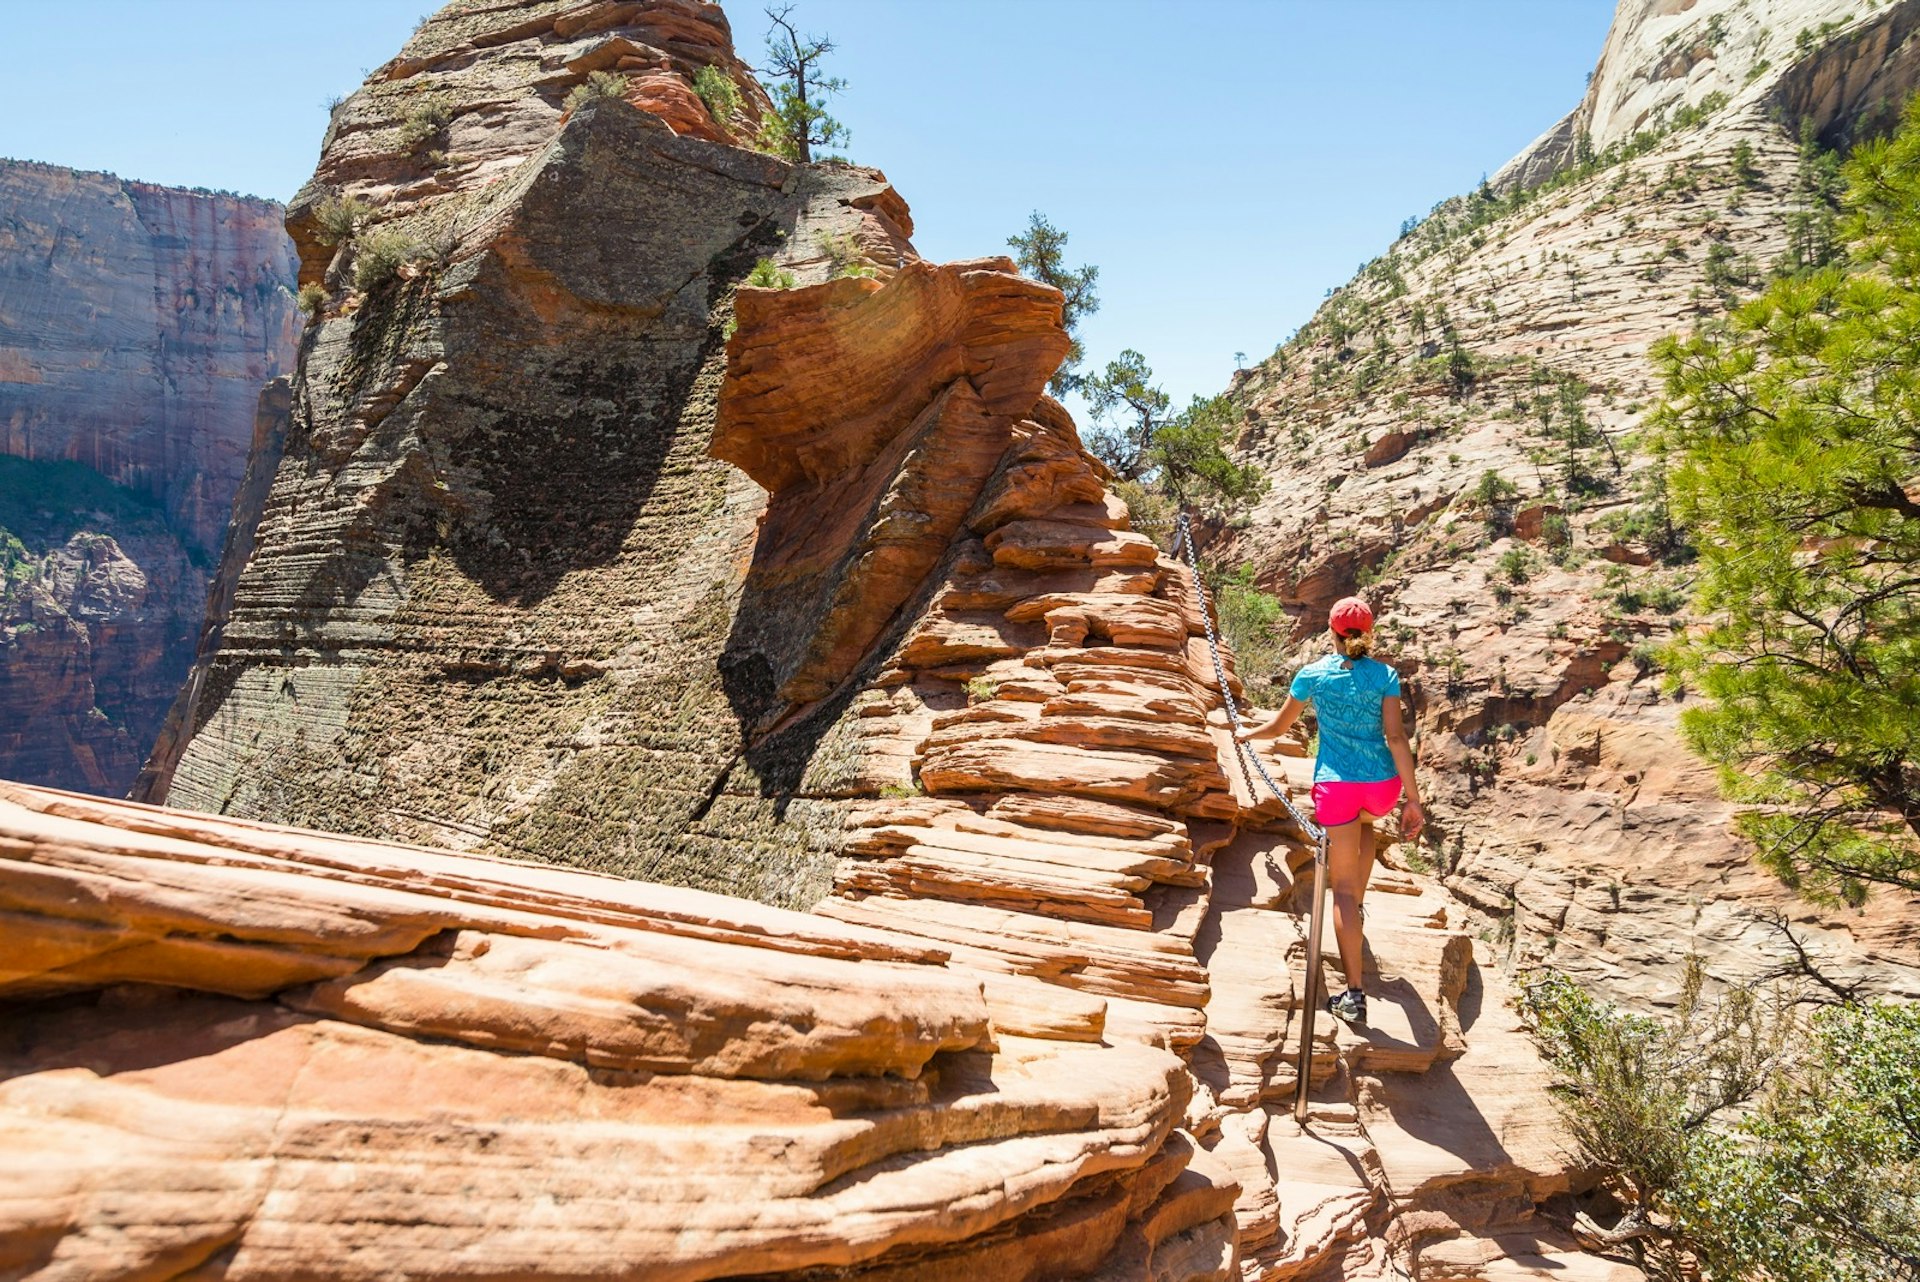 A young woman hikes along the ridge along the Angel's Landing trail in Zion National Park, Utah